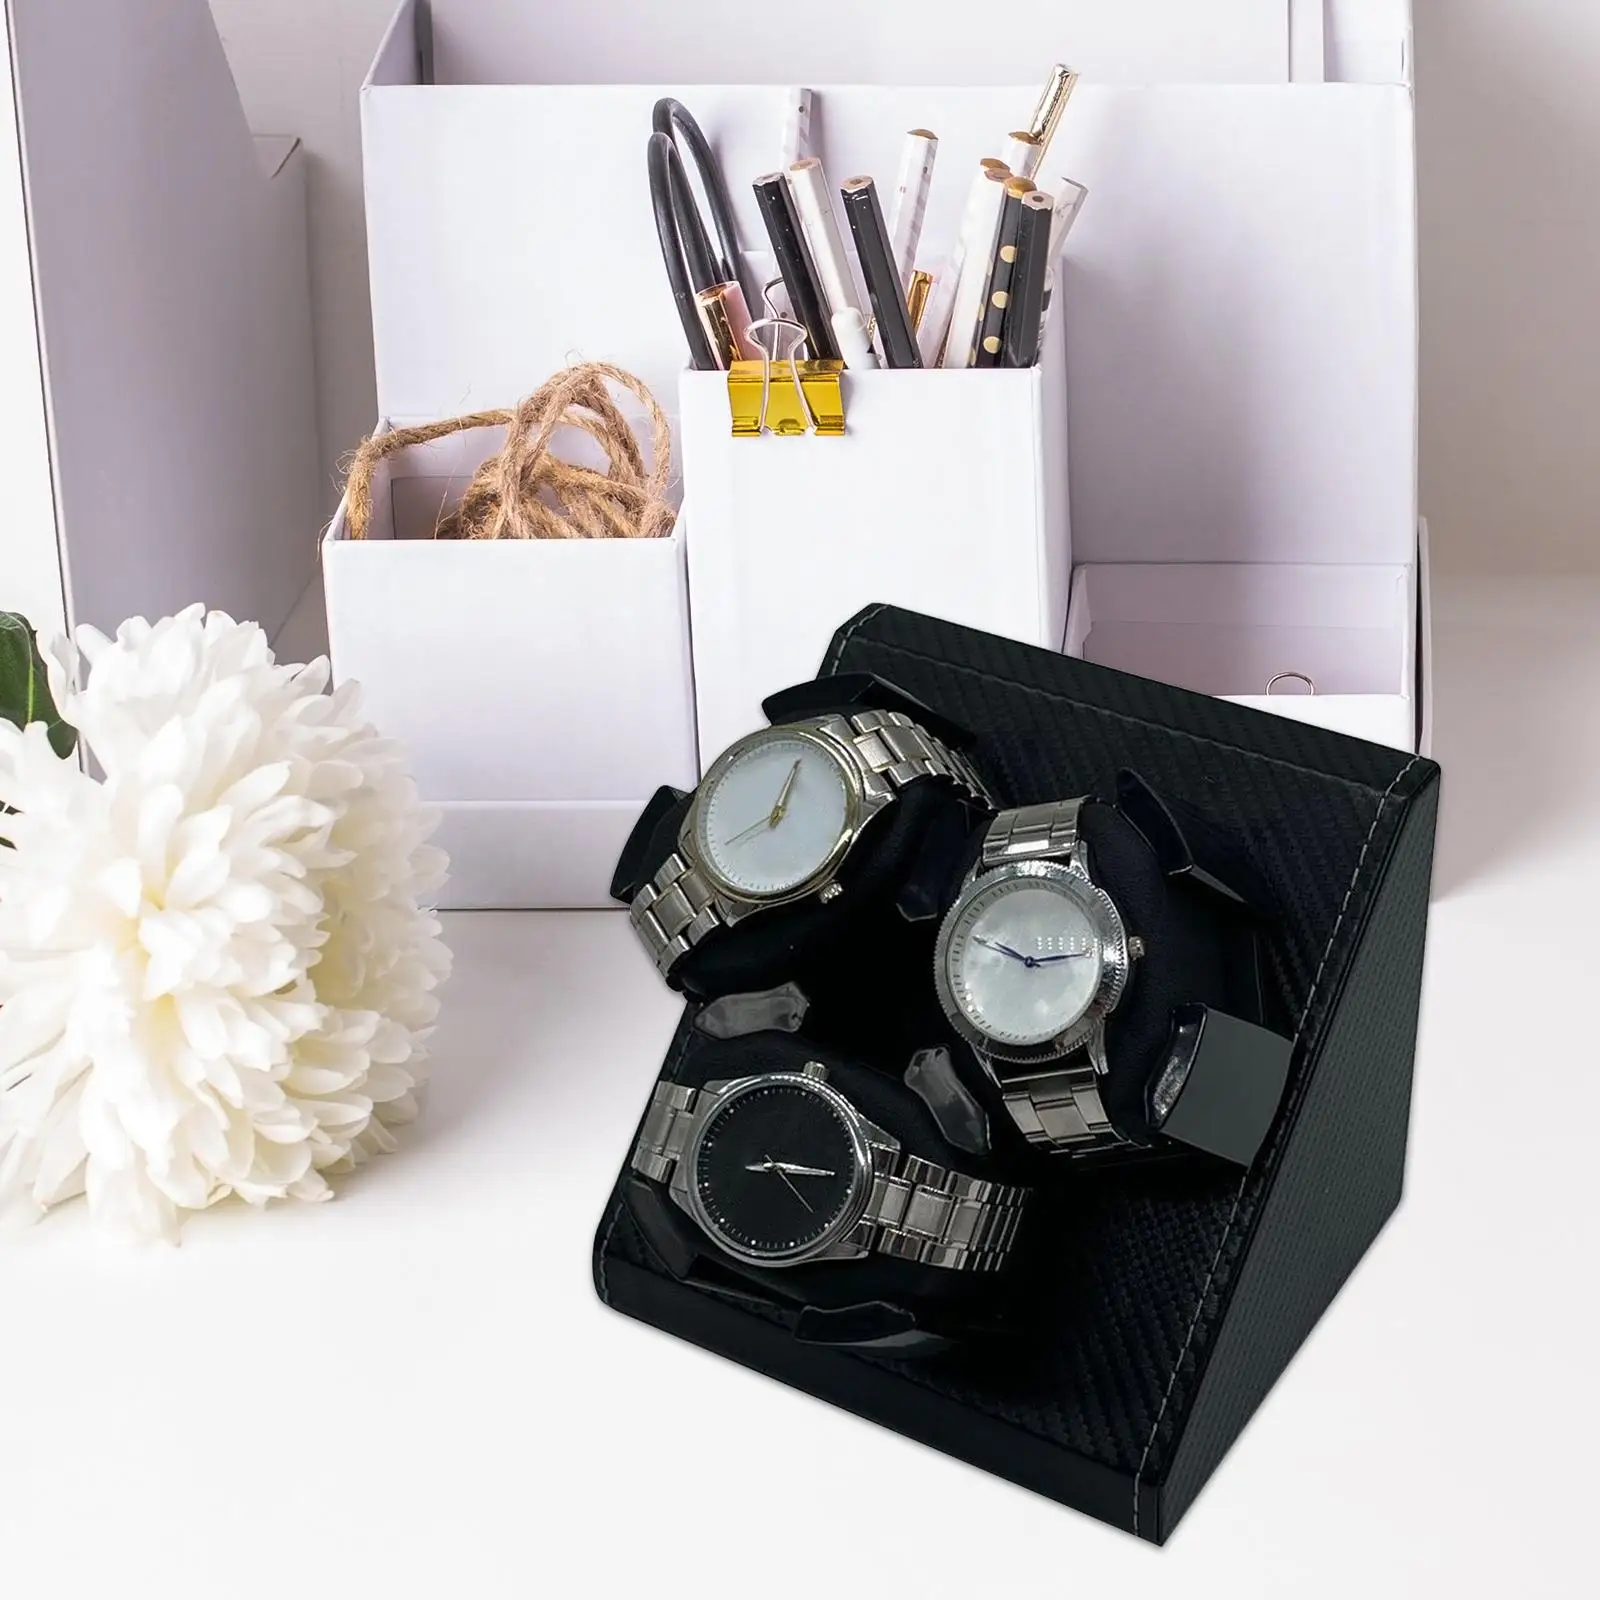 Automatic Watch Winder USB 2 Rotation Mode PU Leather 3 Watch Winder Box for Bedroom Wristwatch Desktop Mechanical Watches Gifts